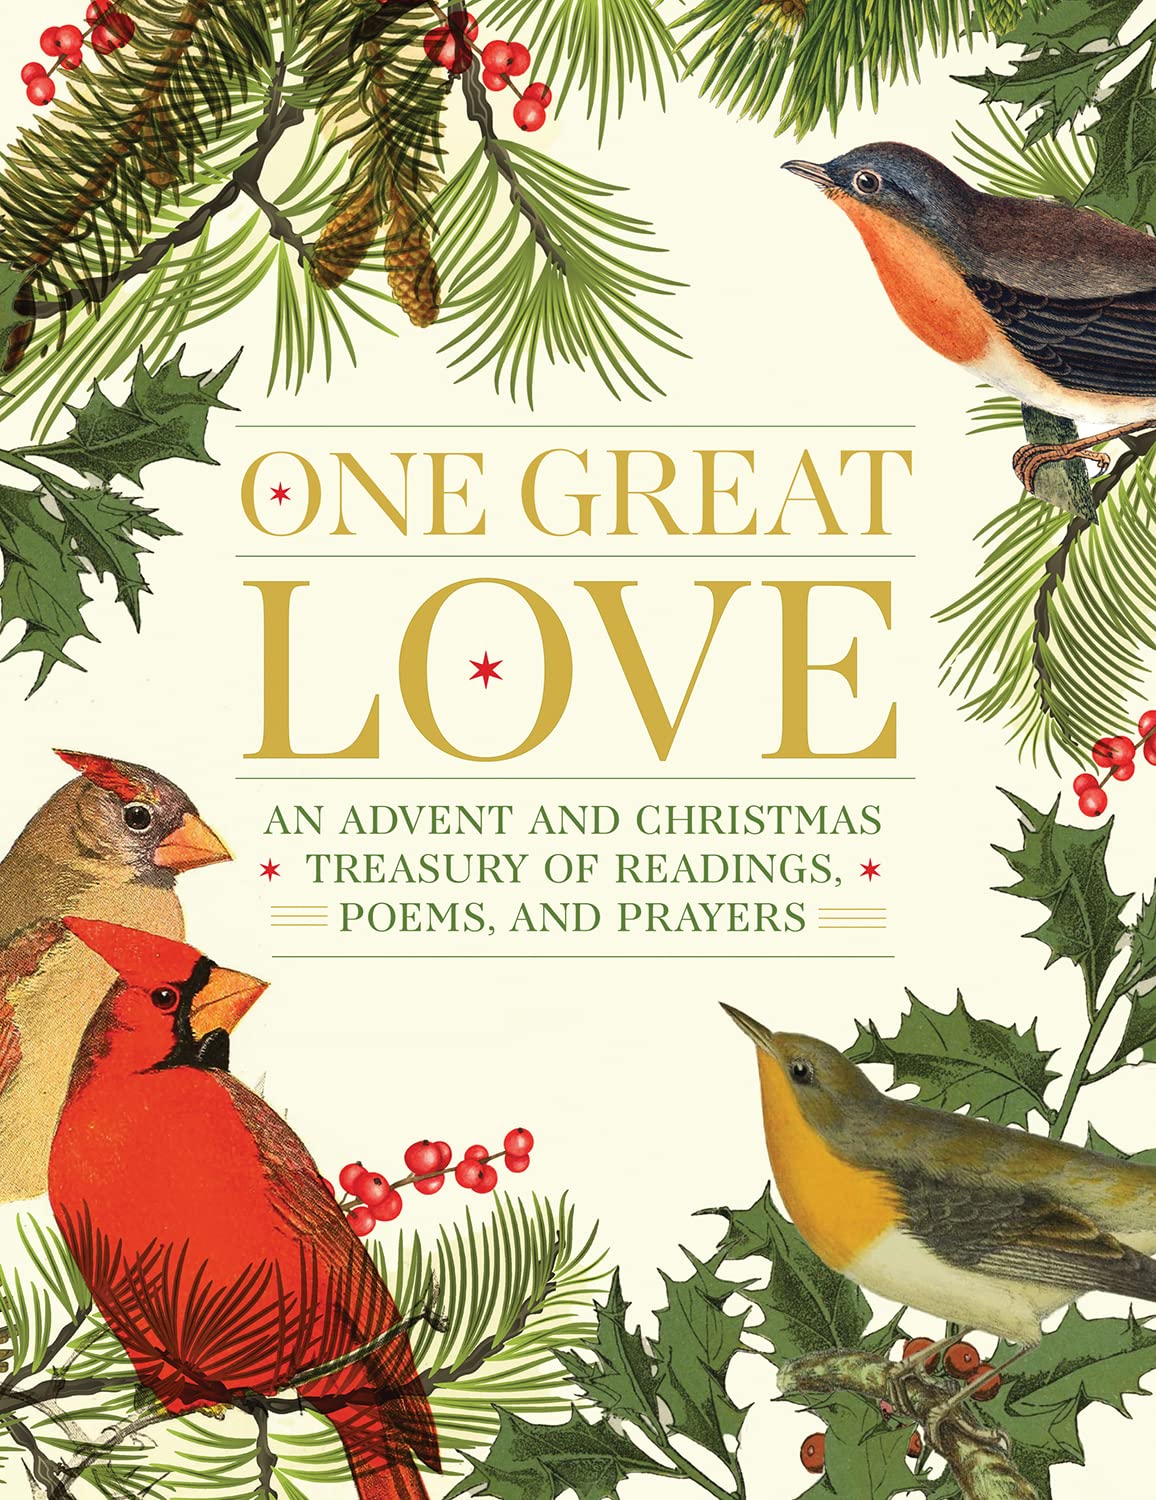 Image for "One Great Love: An Advent and Christmas Treasury of Readings, Poems, and Prayers"